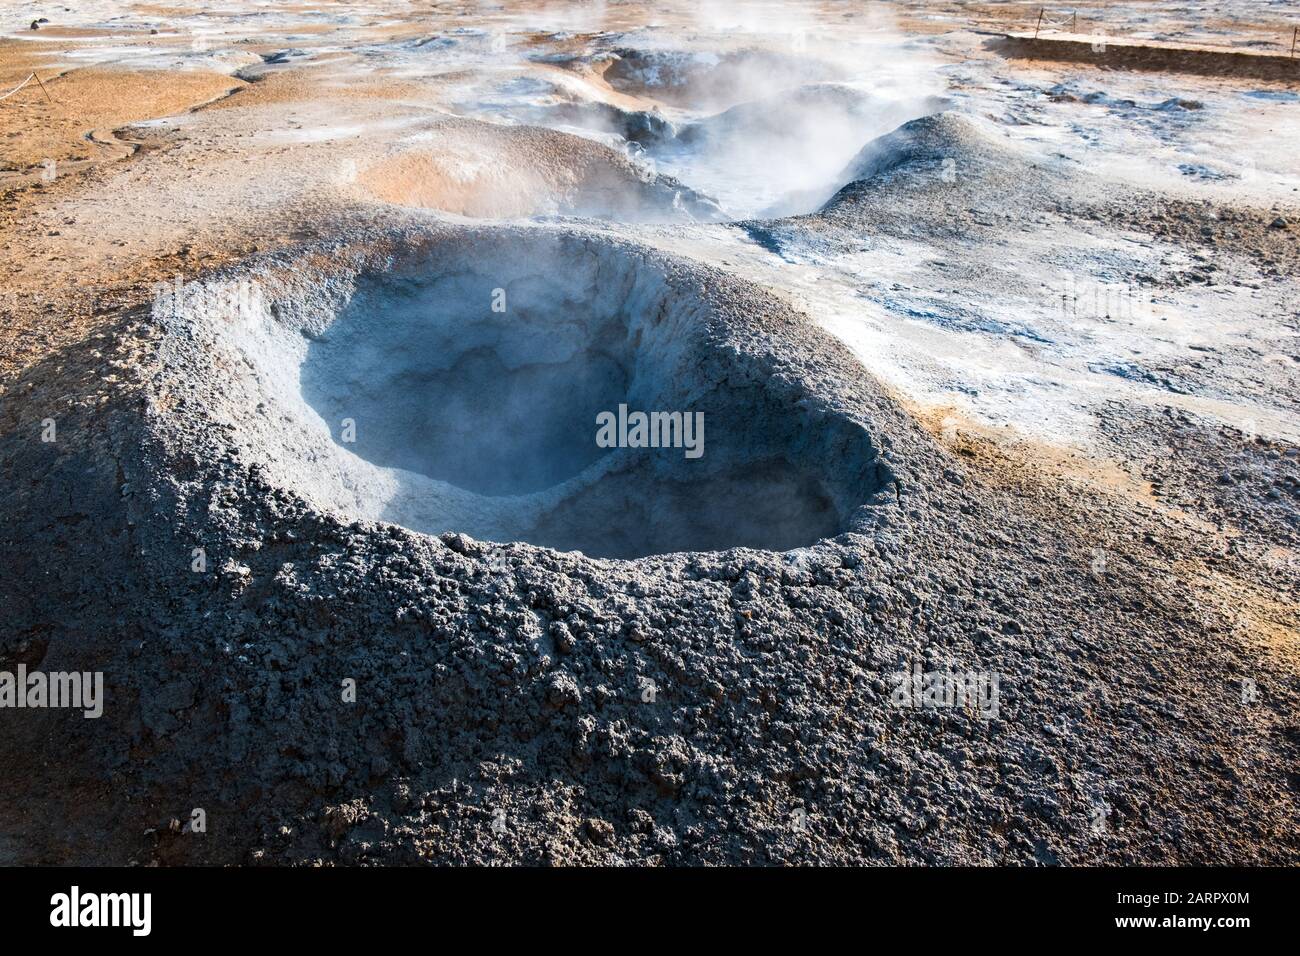 Hverir, also known as the Namafjall Geothermal Area, is located near Northeast Iceland and contains smoking fumaroles such as this one Stock Photo